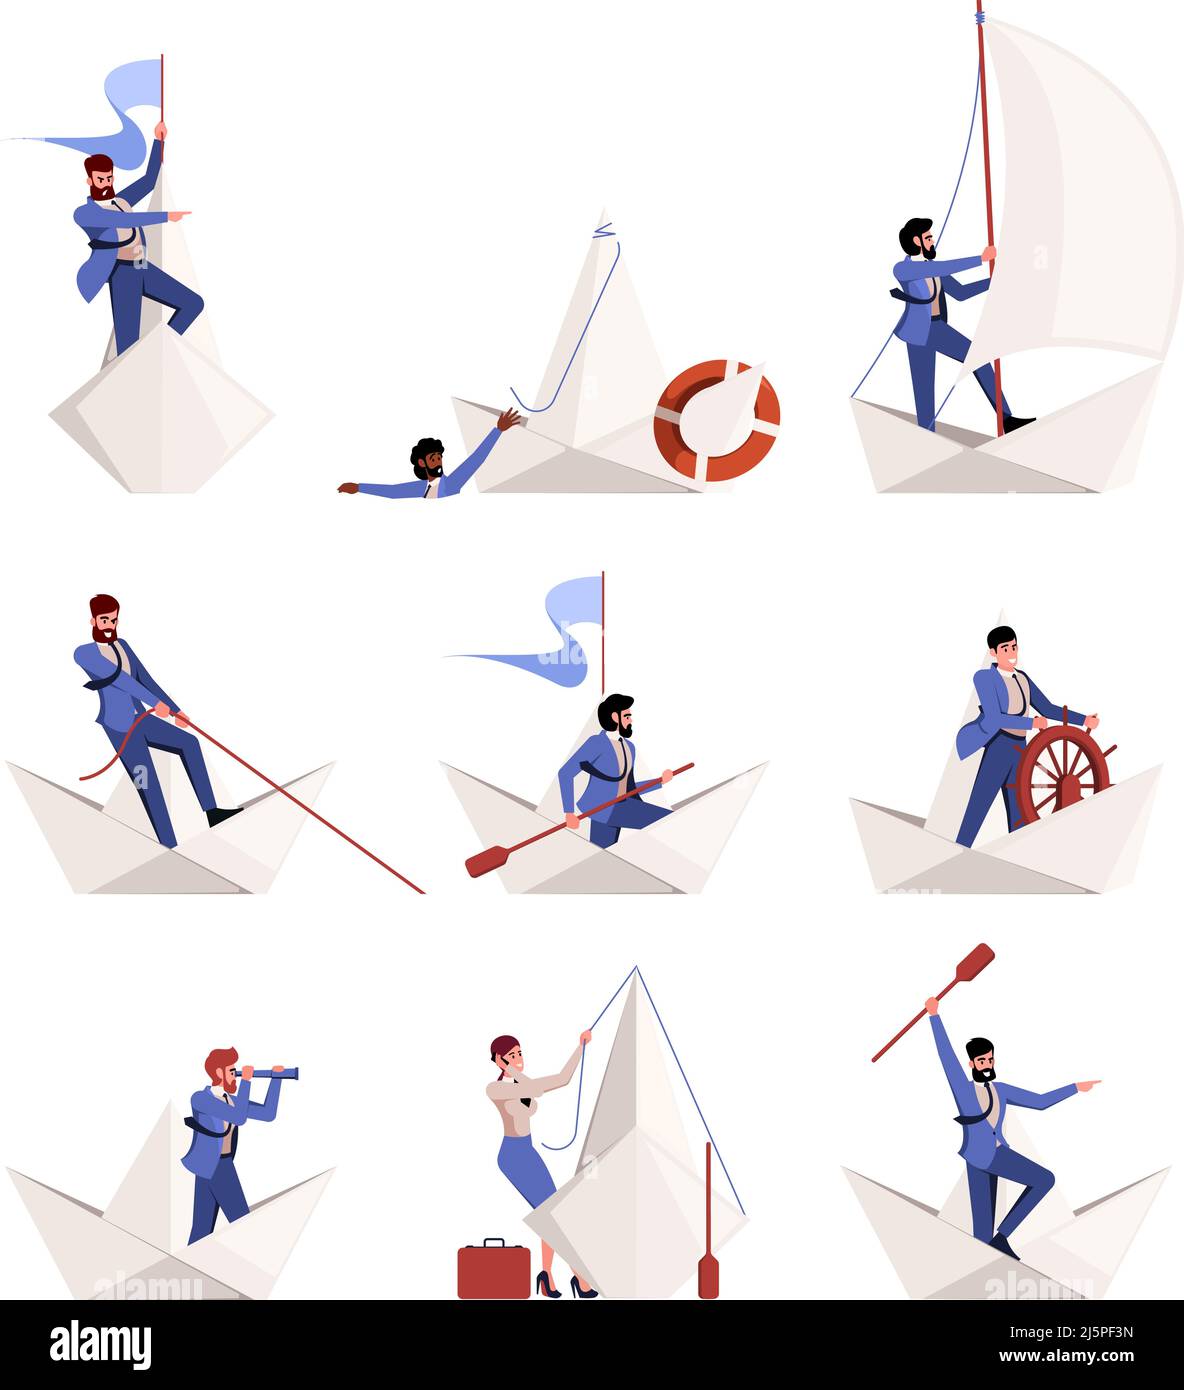 Businessman on paper boat. Leadership concept business navigation freedom teamwork boating characters garish vector pictures in flat style Stock Vector